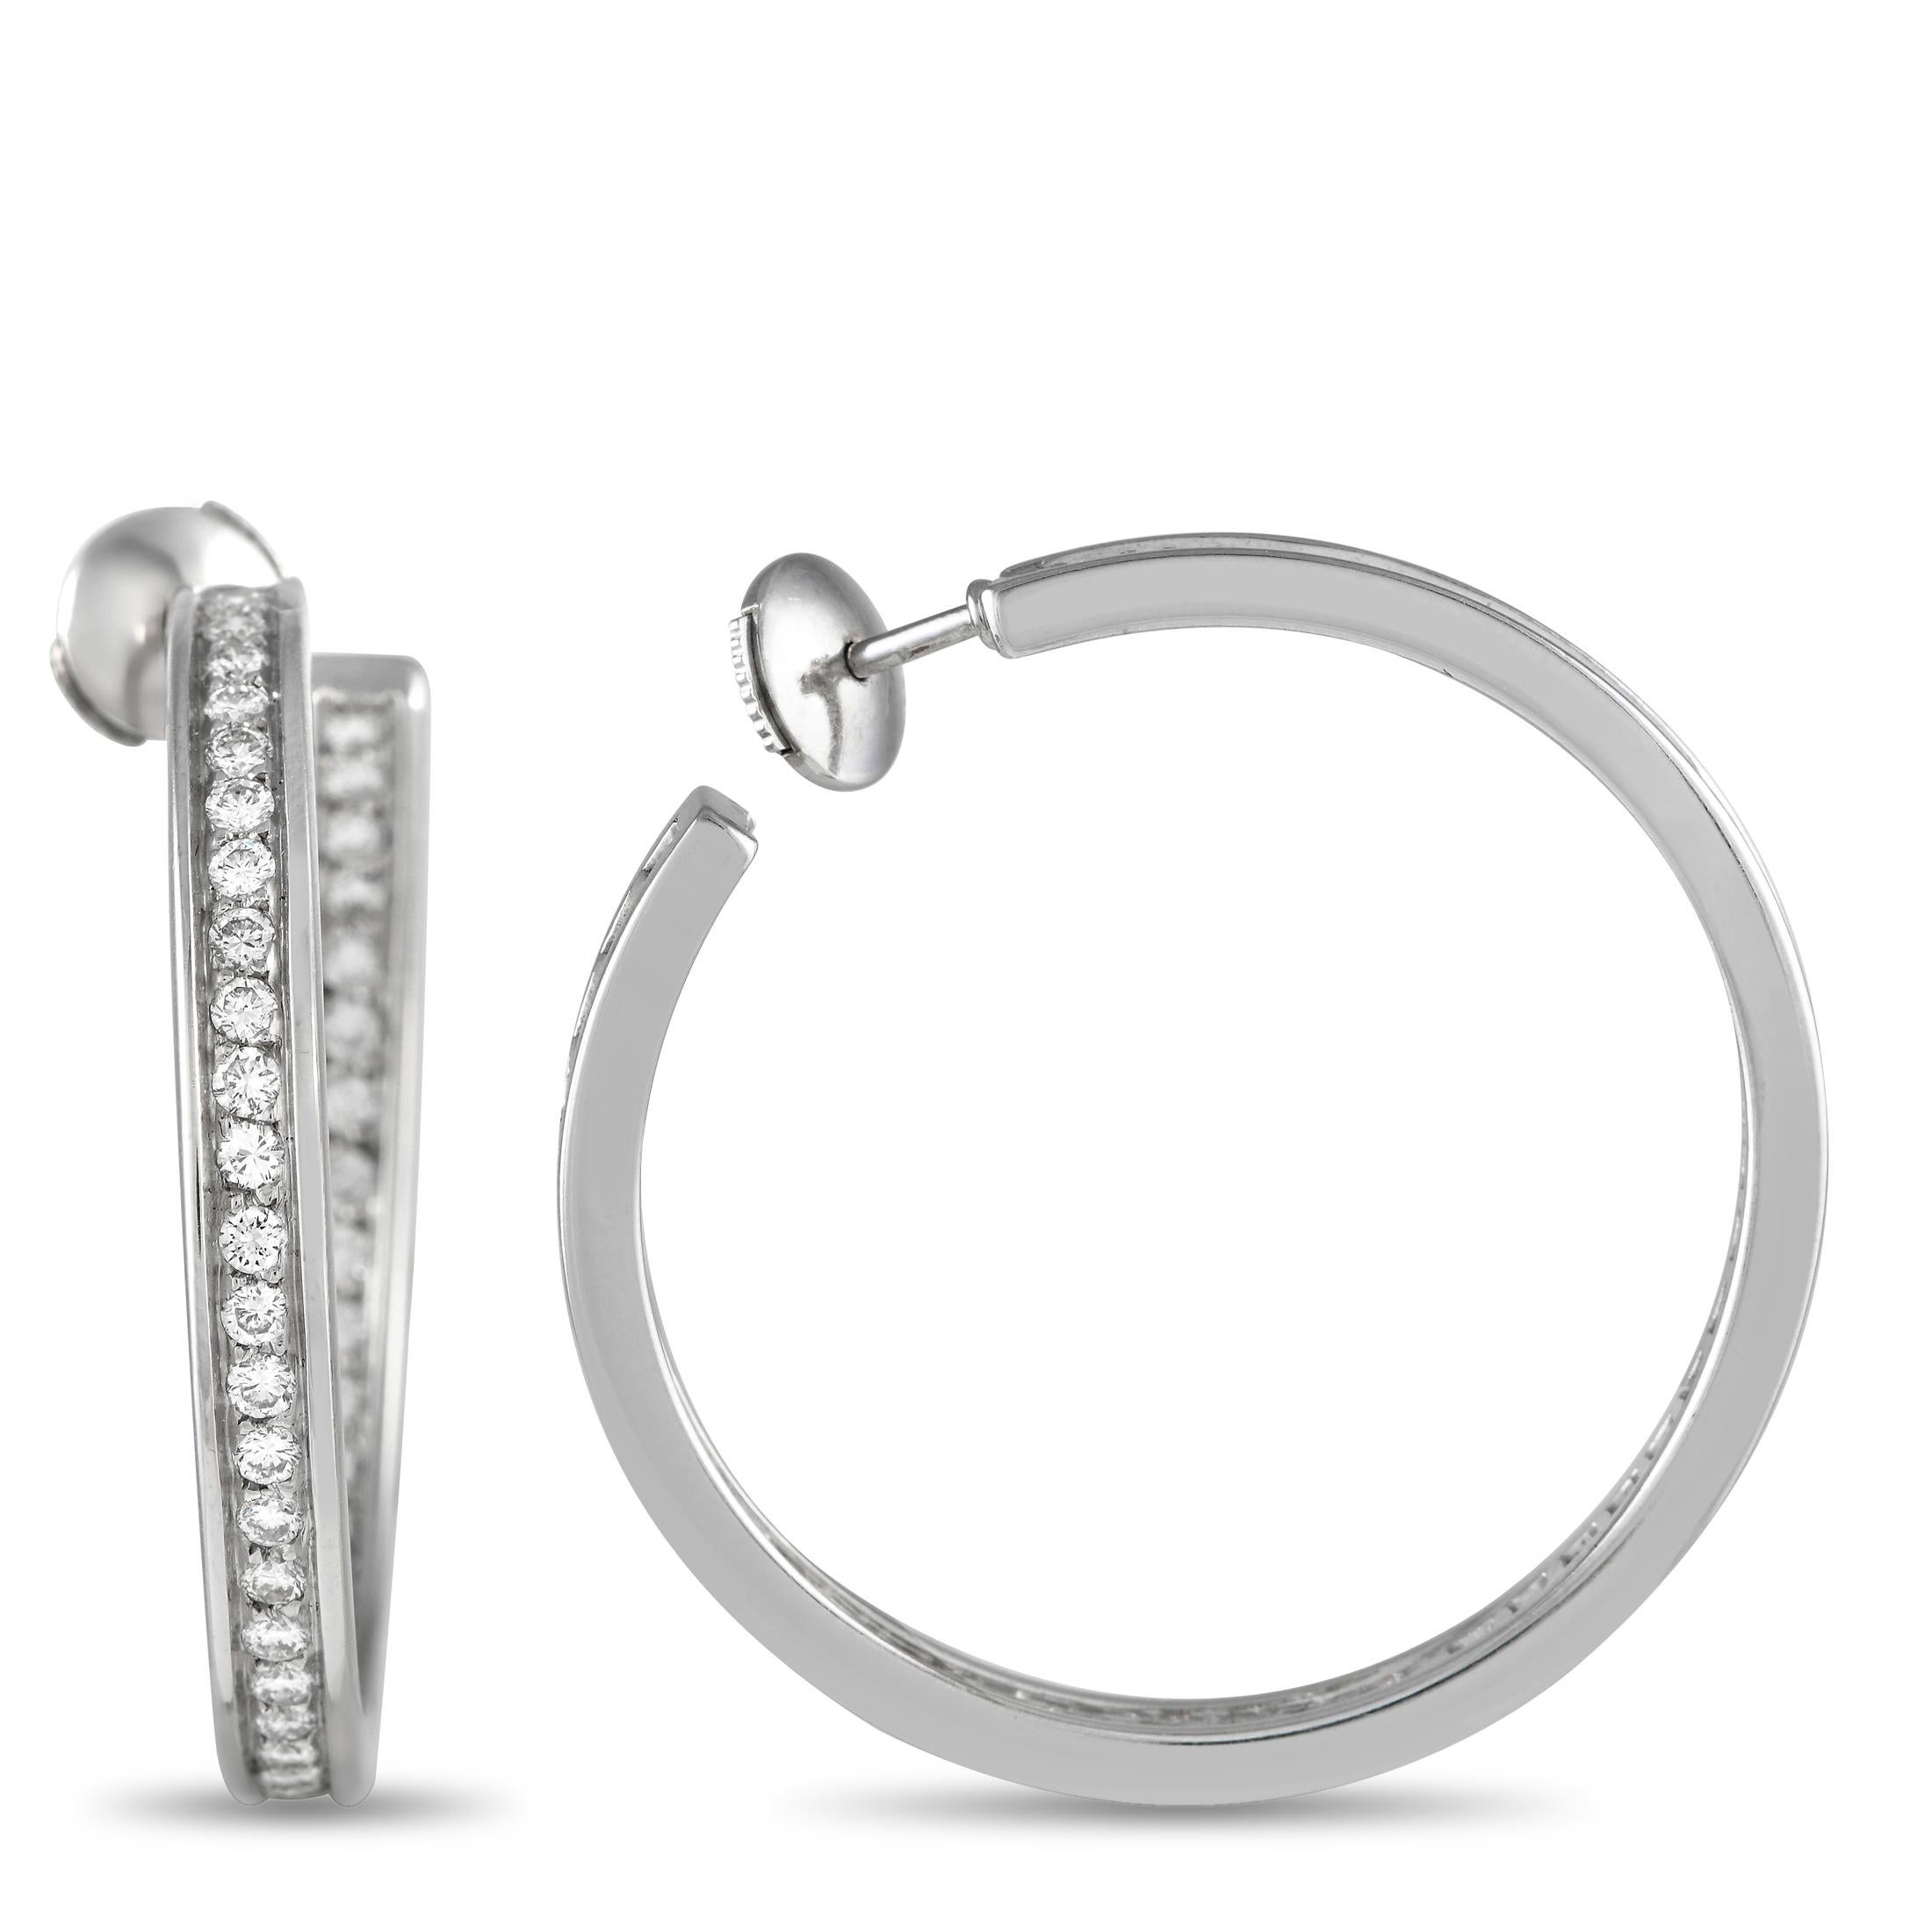 These Cartier hoop earrings will never go out of style. Each one features a simple, elegant 18K White Gold setting measuring 1.25 long by 0.25 wide. Diamonds with a total weight of 3.0 carats add additional sparkle.This jewelry piece is offered in